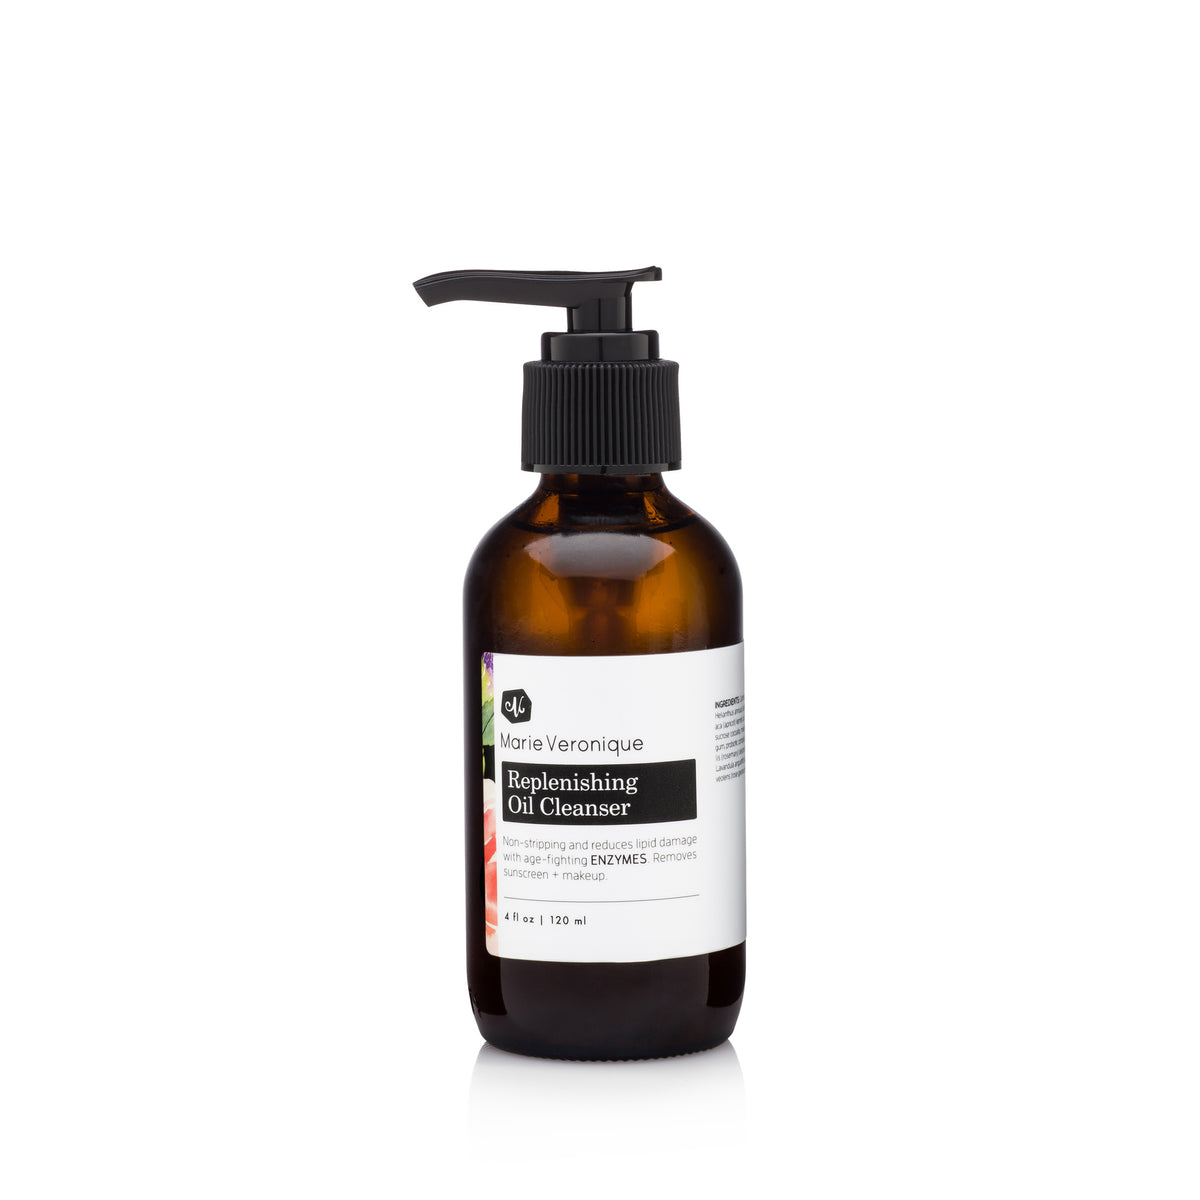 Marie Veronique Replenishing Oil Cleanser 4 fl oz / 120 ml. Non-stripping. Smoothes skin with SOD + OMEGA-6 OILS. Stimulates circulation. Removes sunscreen + makeup.